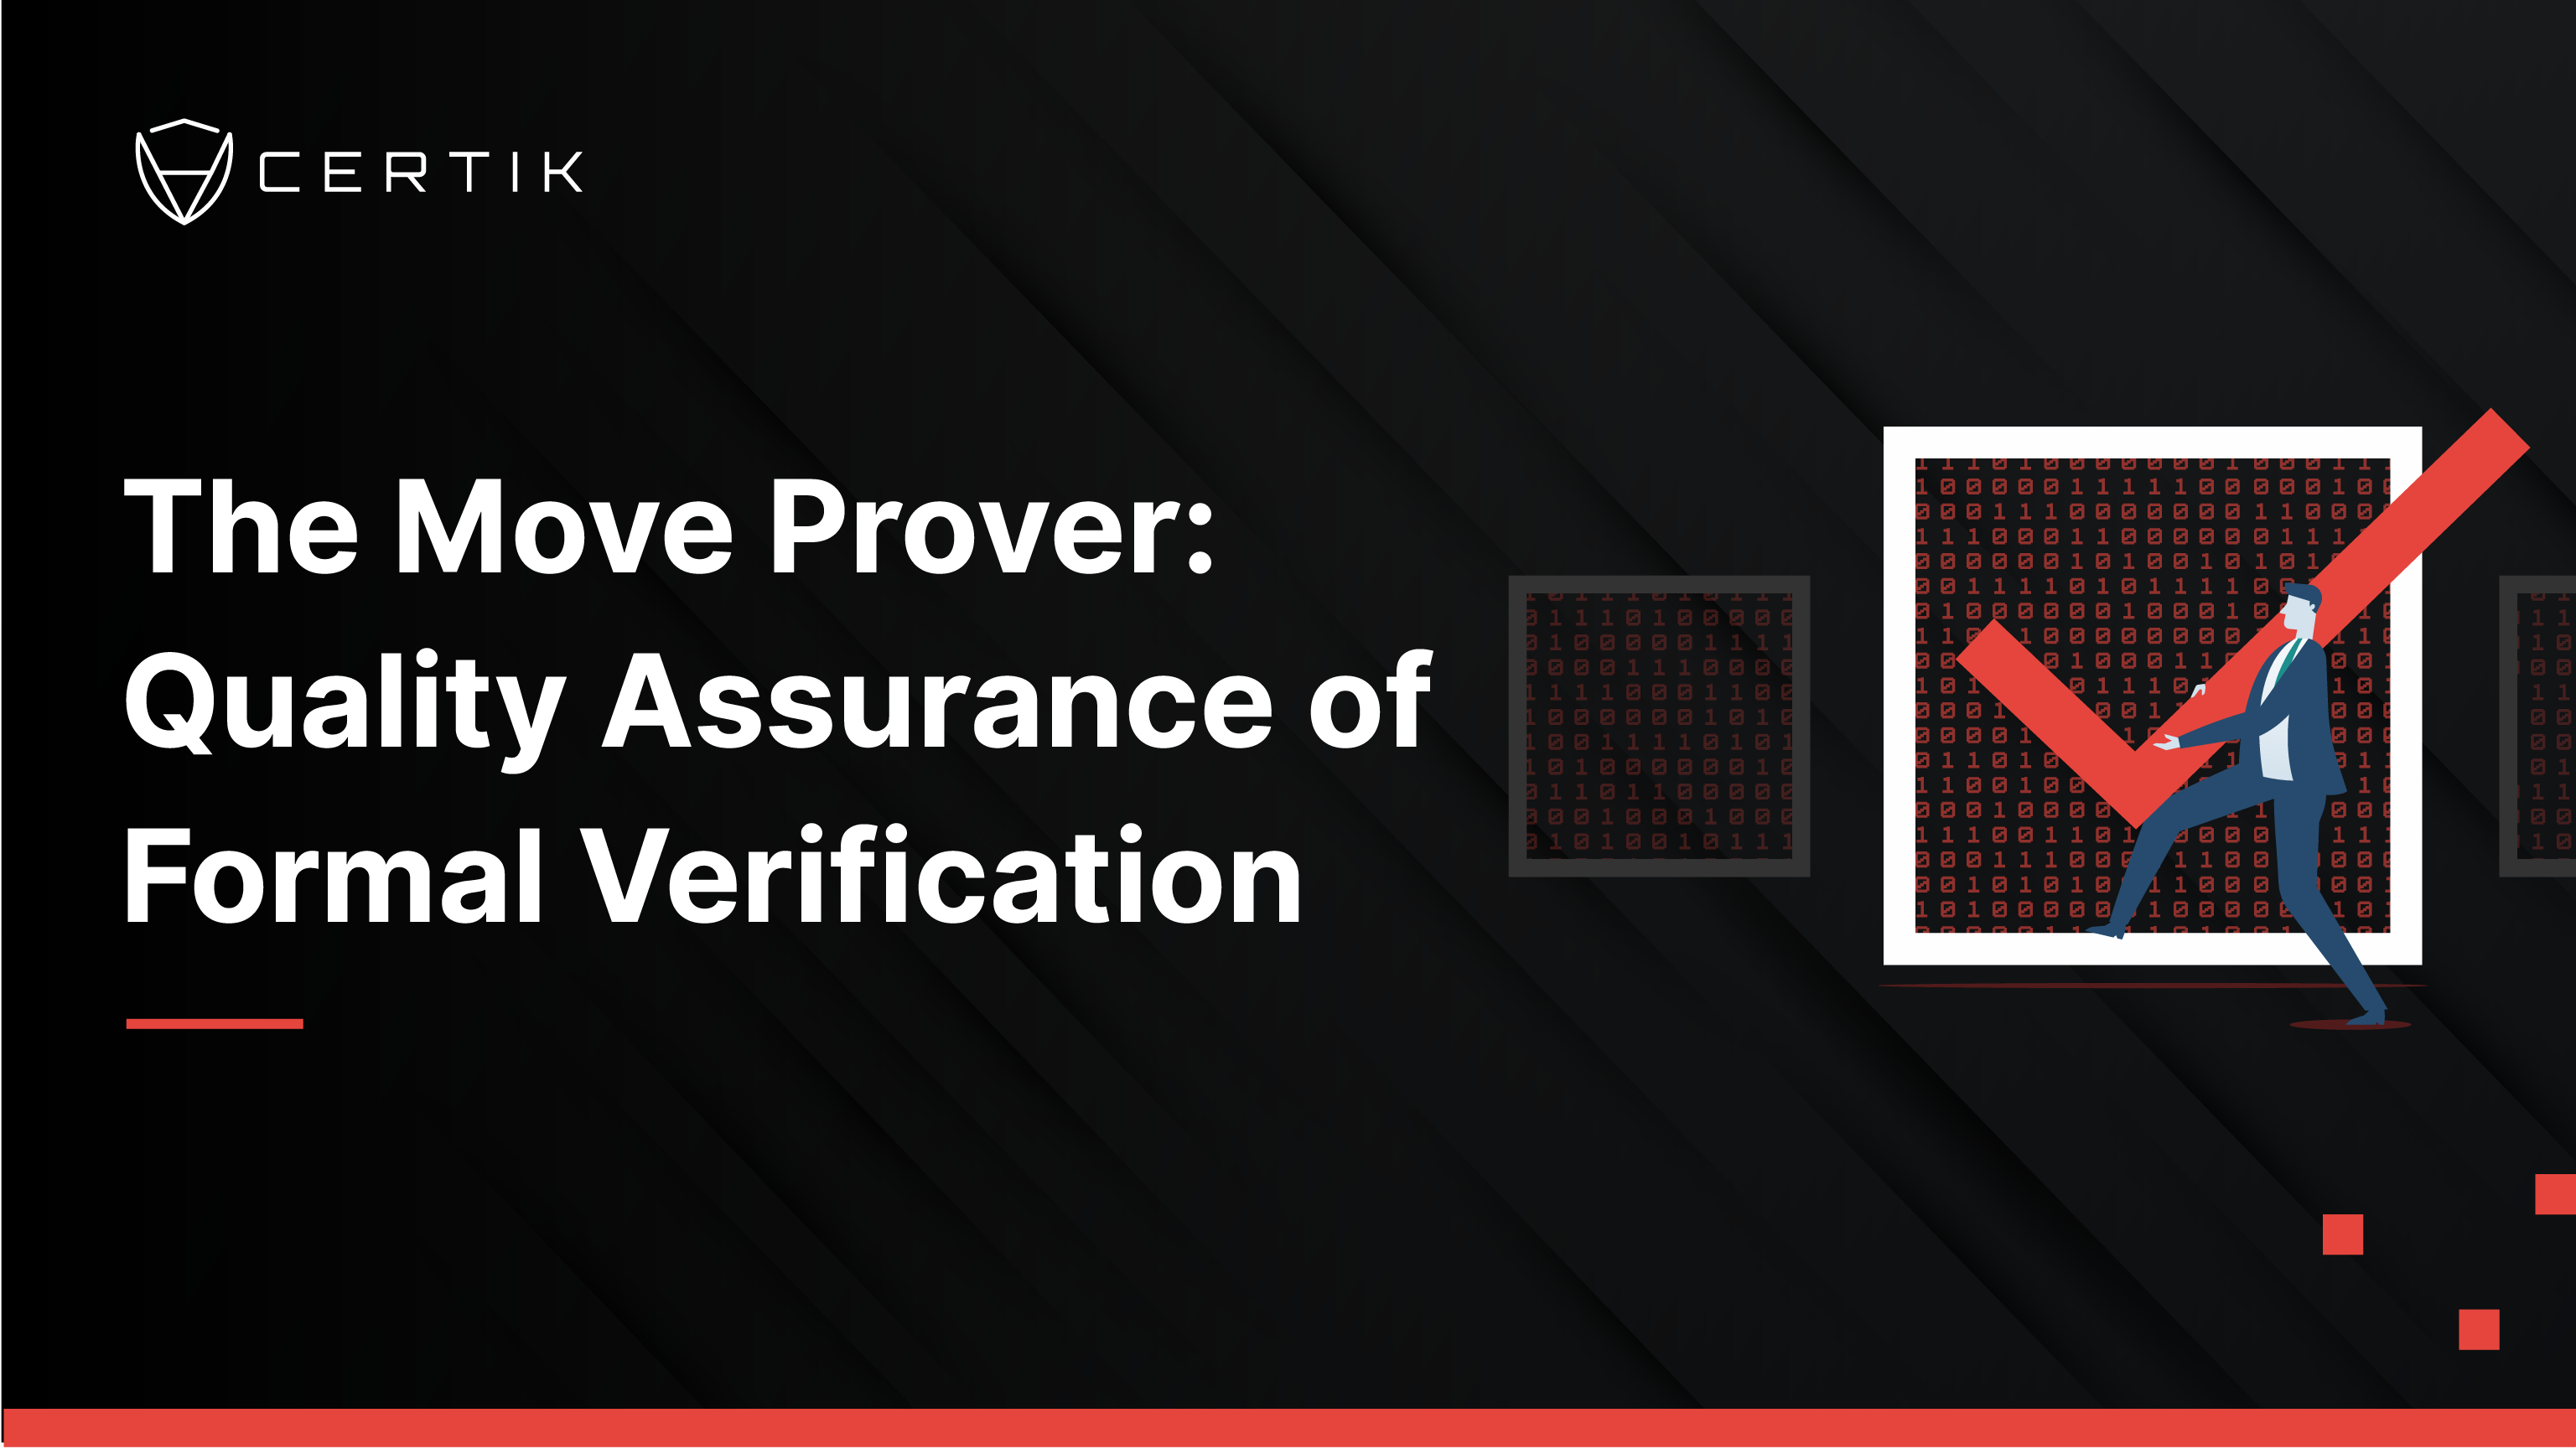 The Move Prover: Quality Assurance of Formal Verification